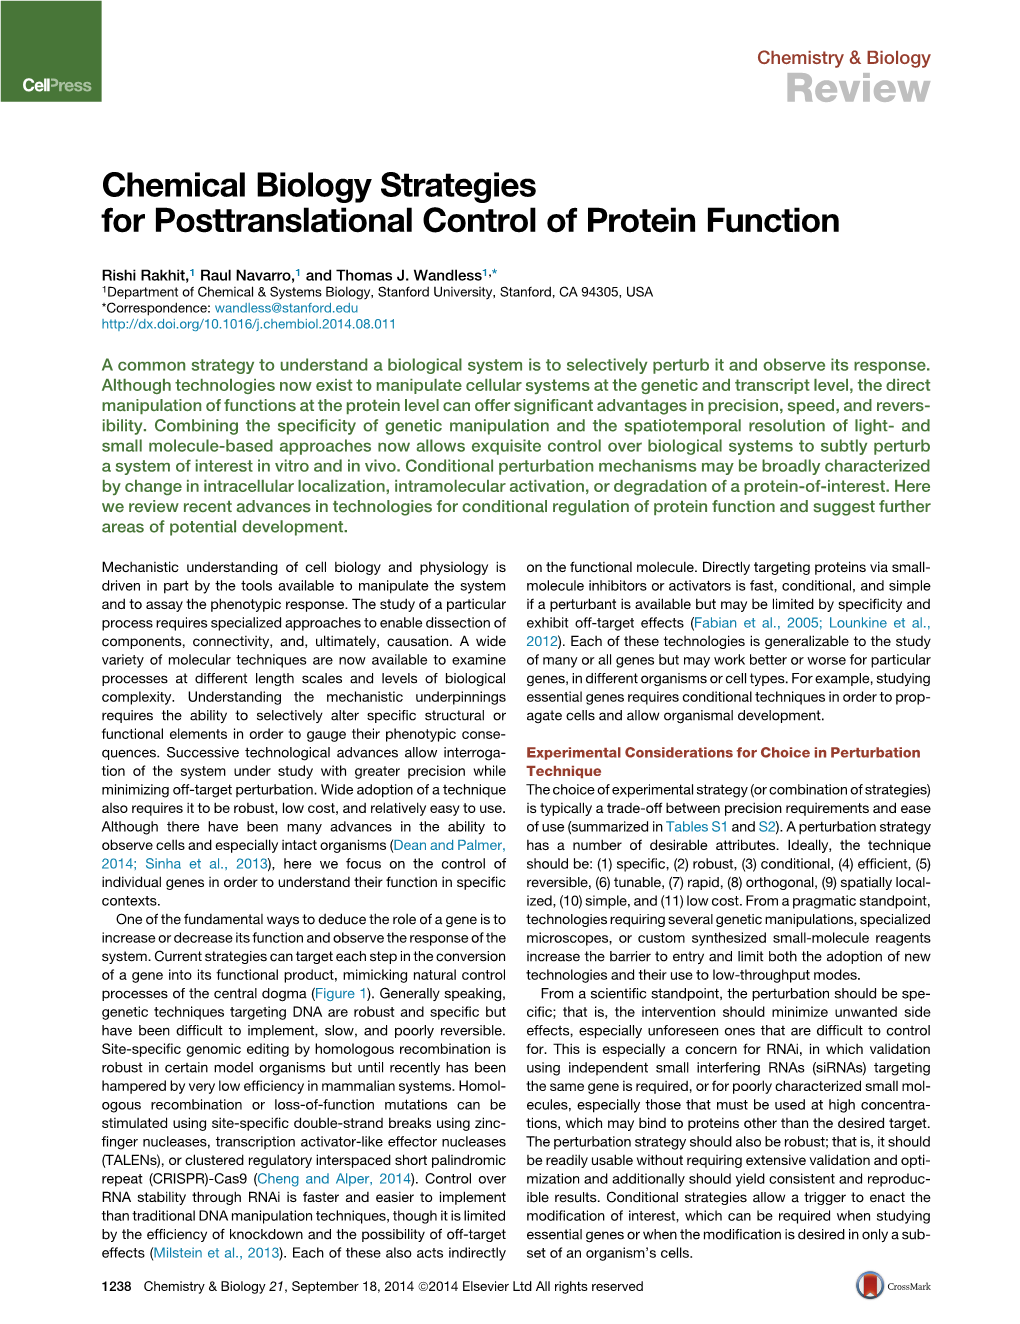 Chemical Biology Strategies for Posttranslational Control of Protein Function